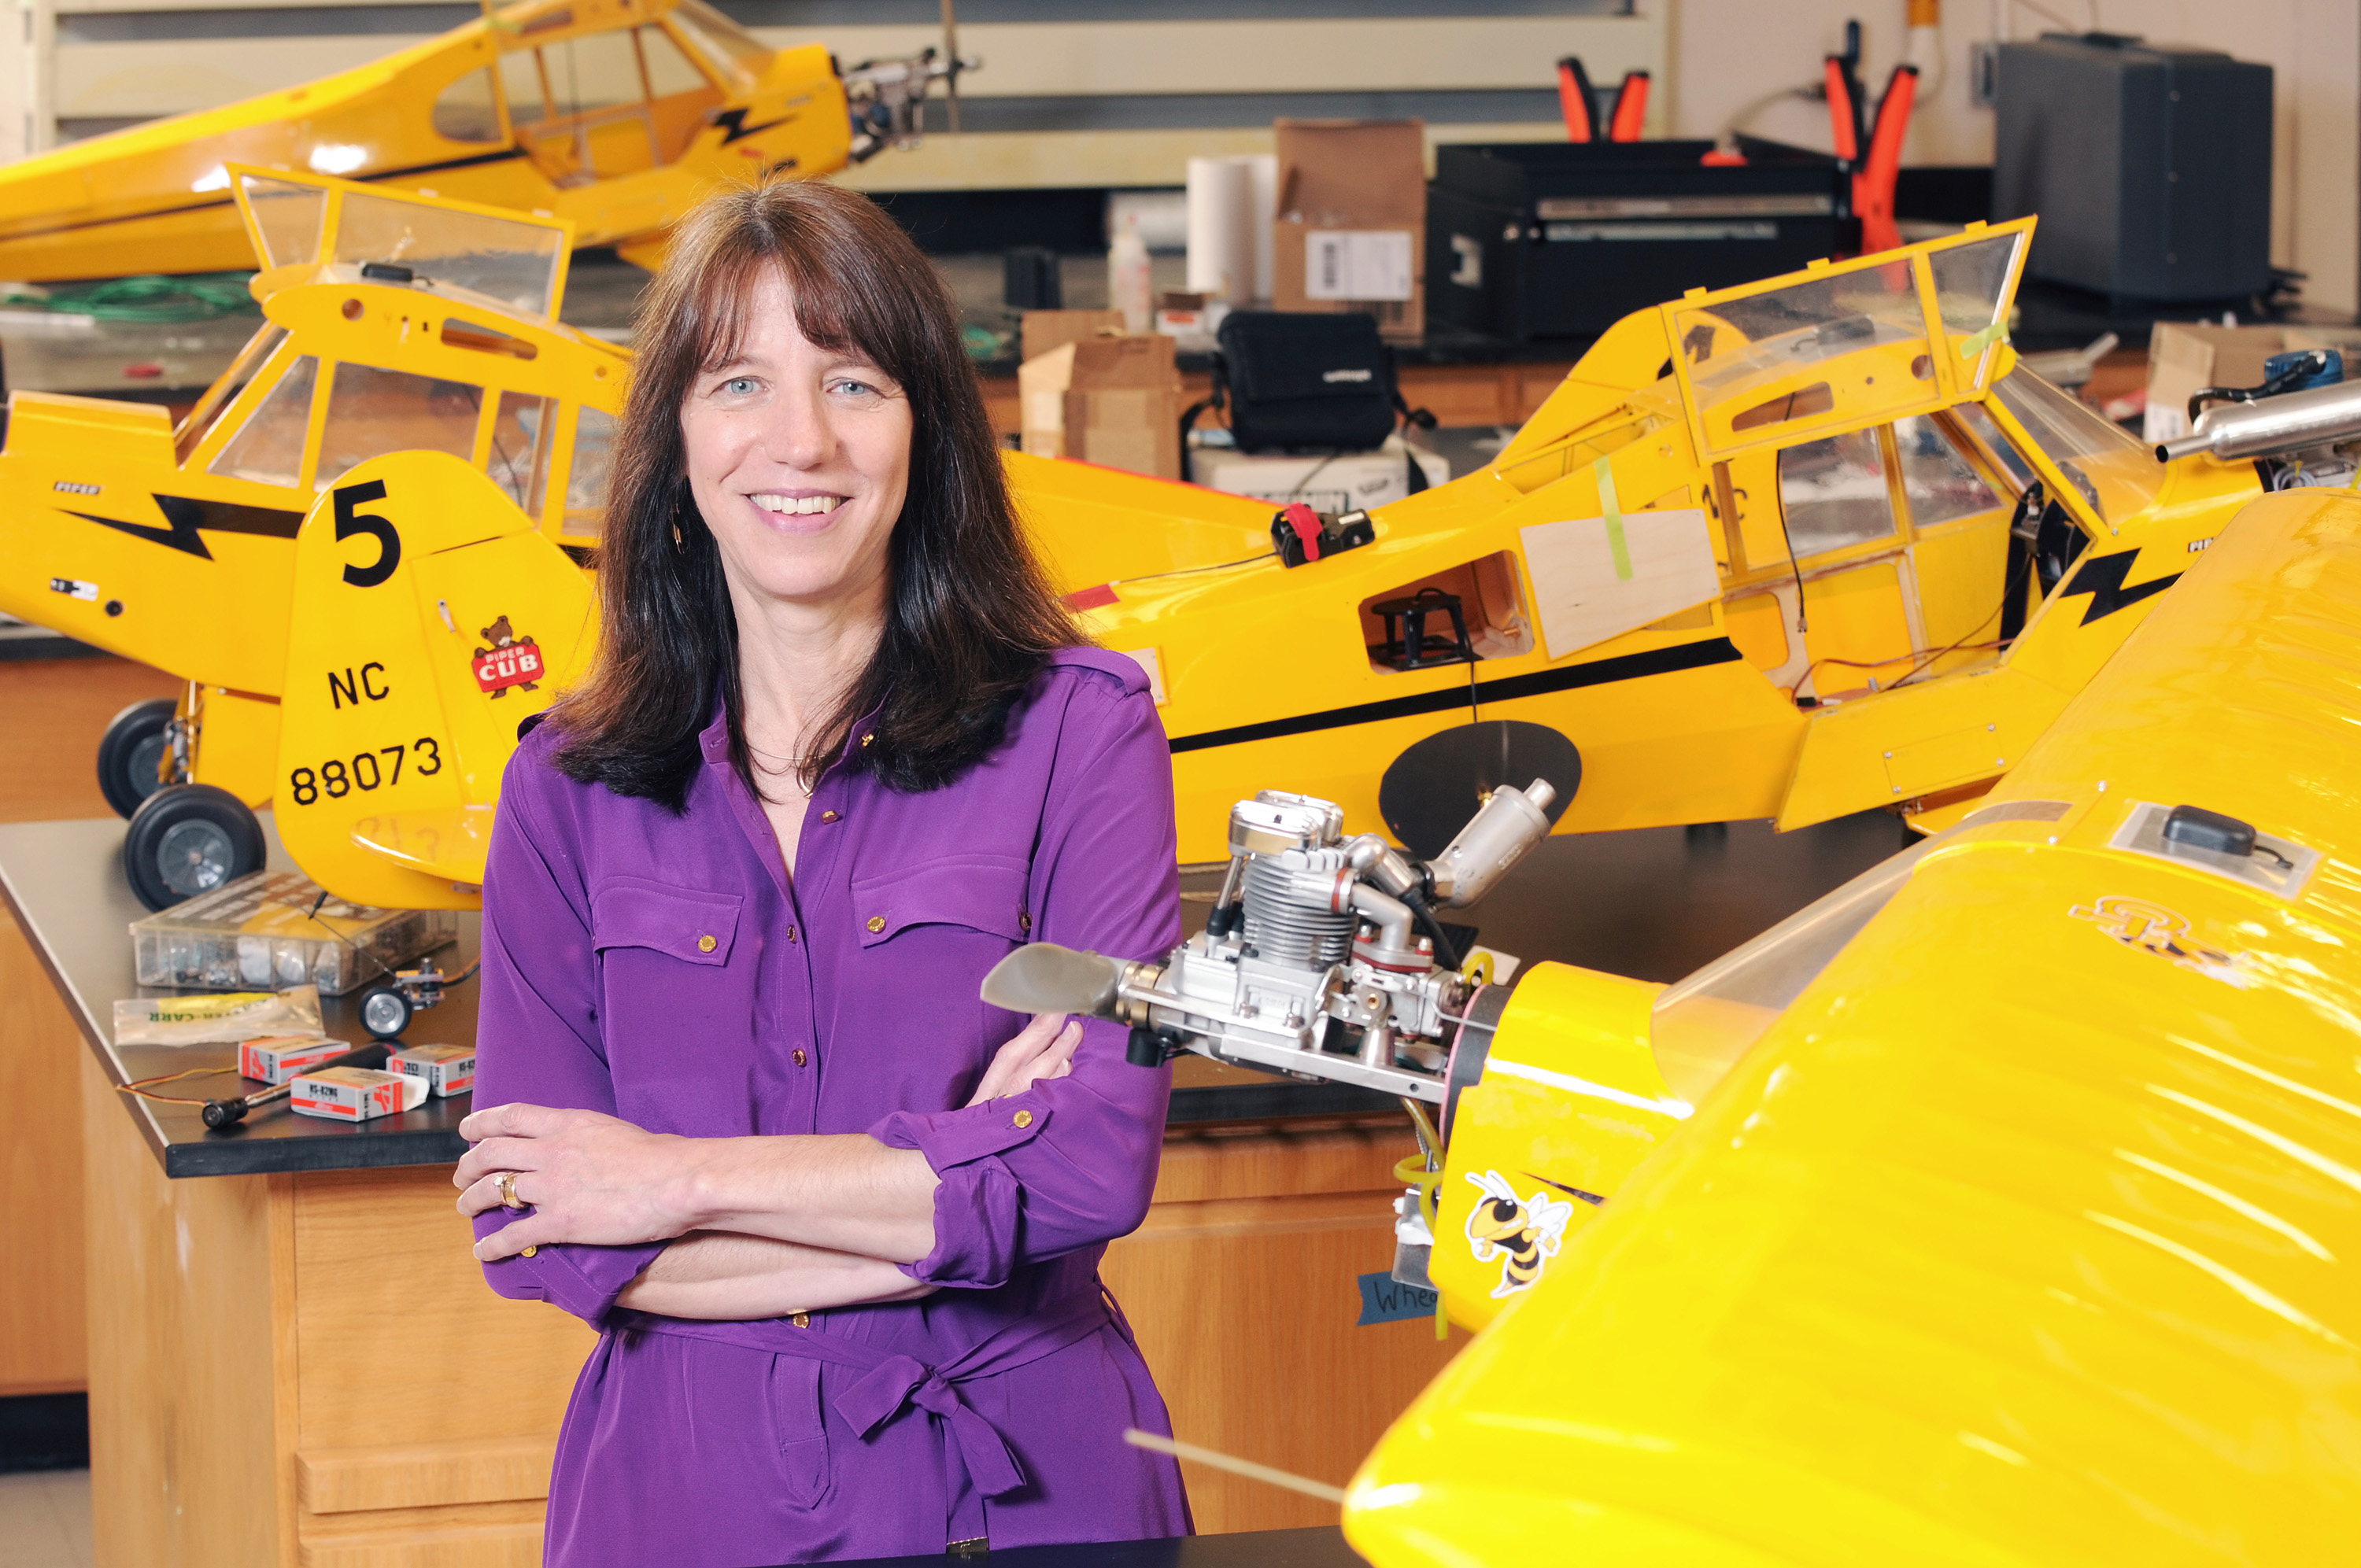 Lora Weiss, chief scientist in the Georgia Tech Research Institute (GTRI), is shown with quarter-scale Piper Cub aircraft used in research on collaboration between unmanned aerial vehicles. (Photo: Gary Meek)